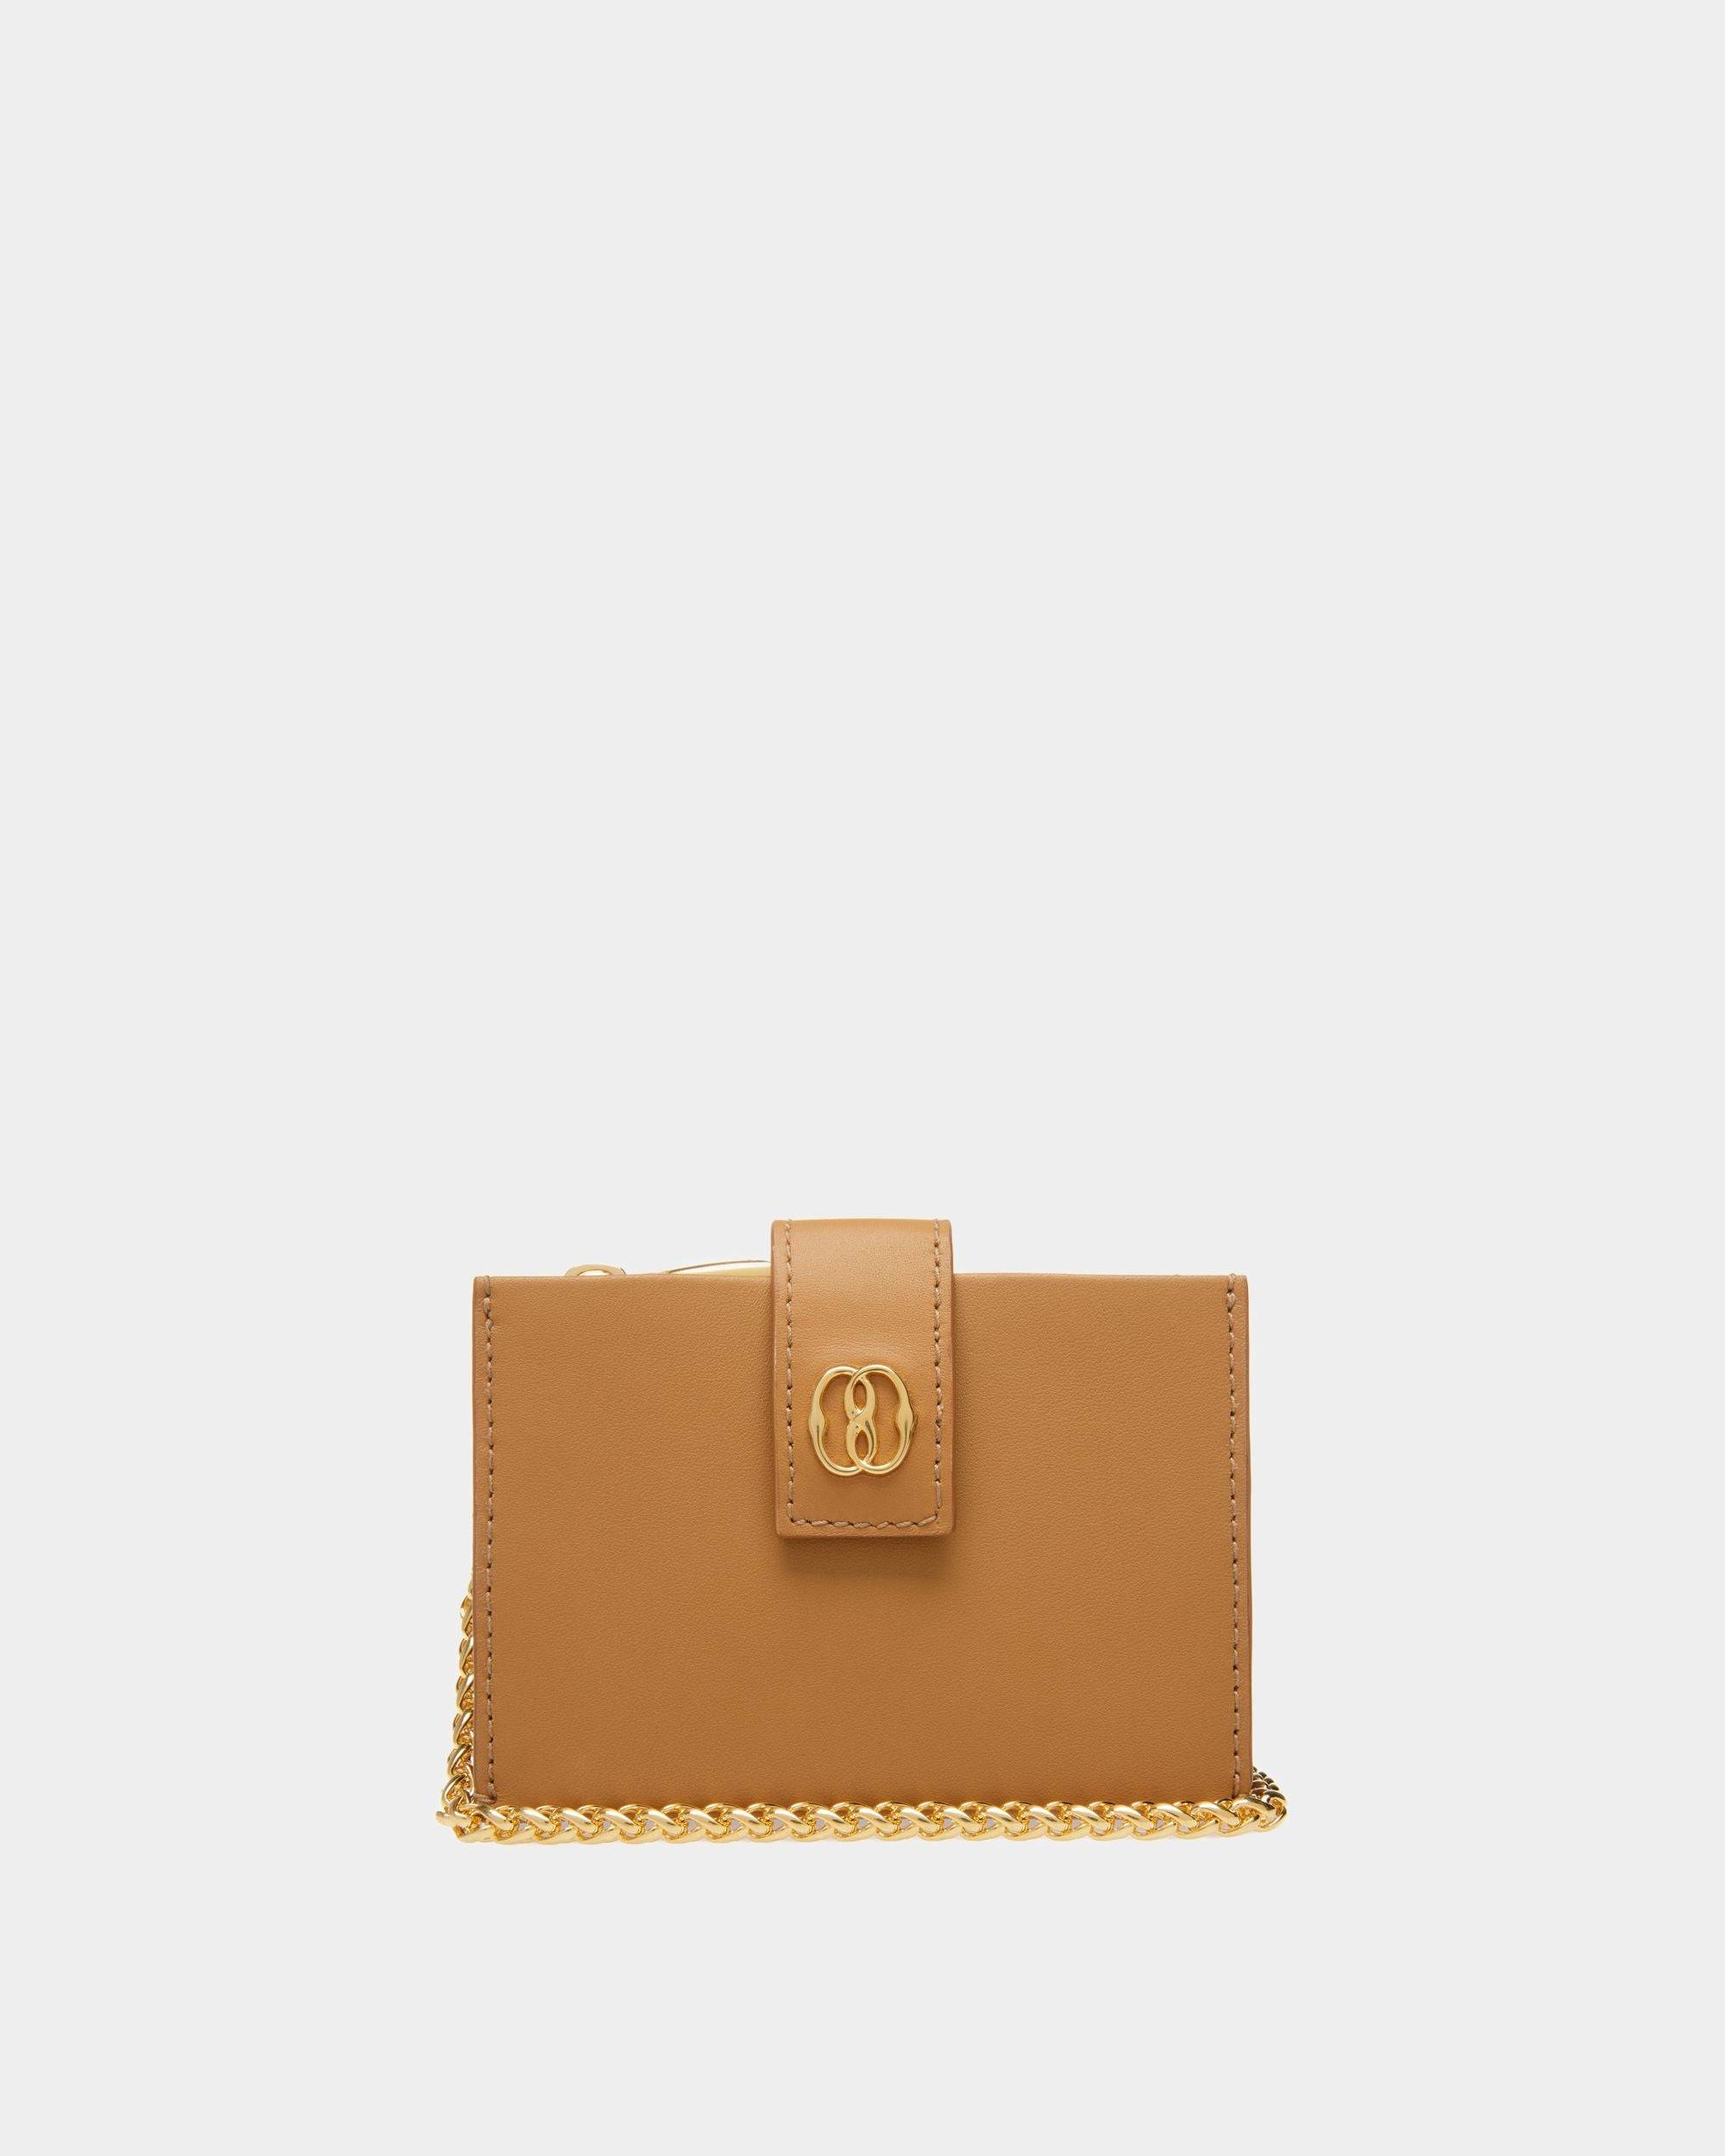 Women's Luxury Leather Wallets and Card Holders | Bally